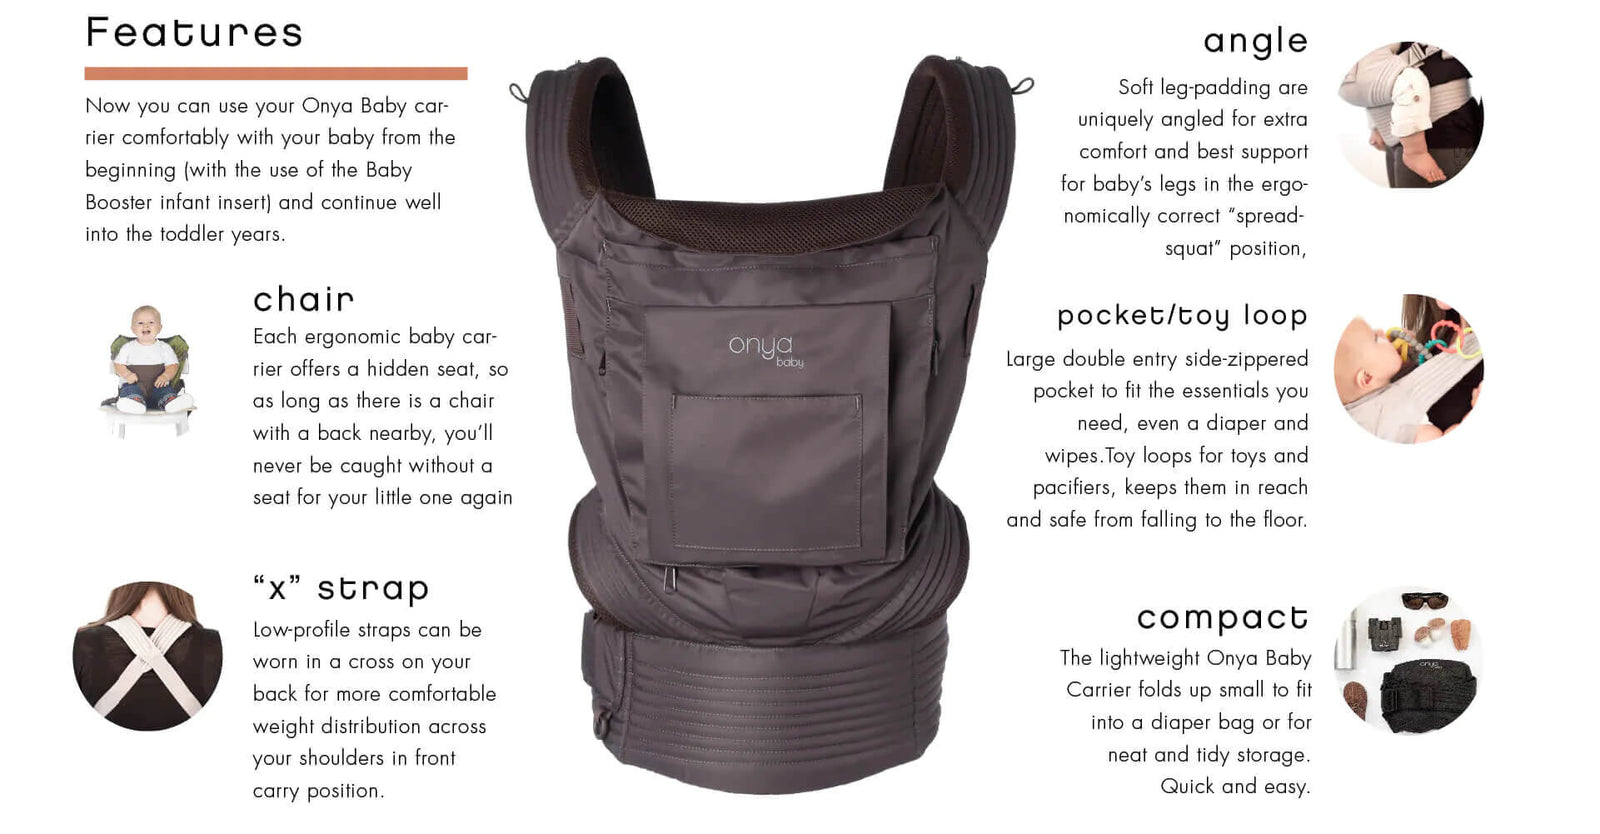 Product features display showing a list of features on the Onya Baby Nexstep Baby Carrier